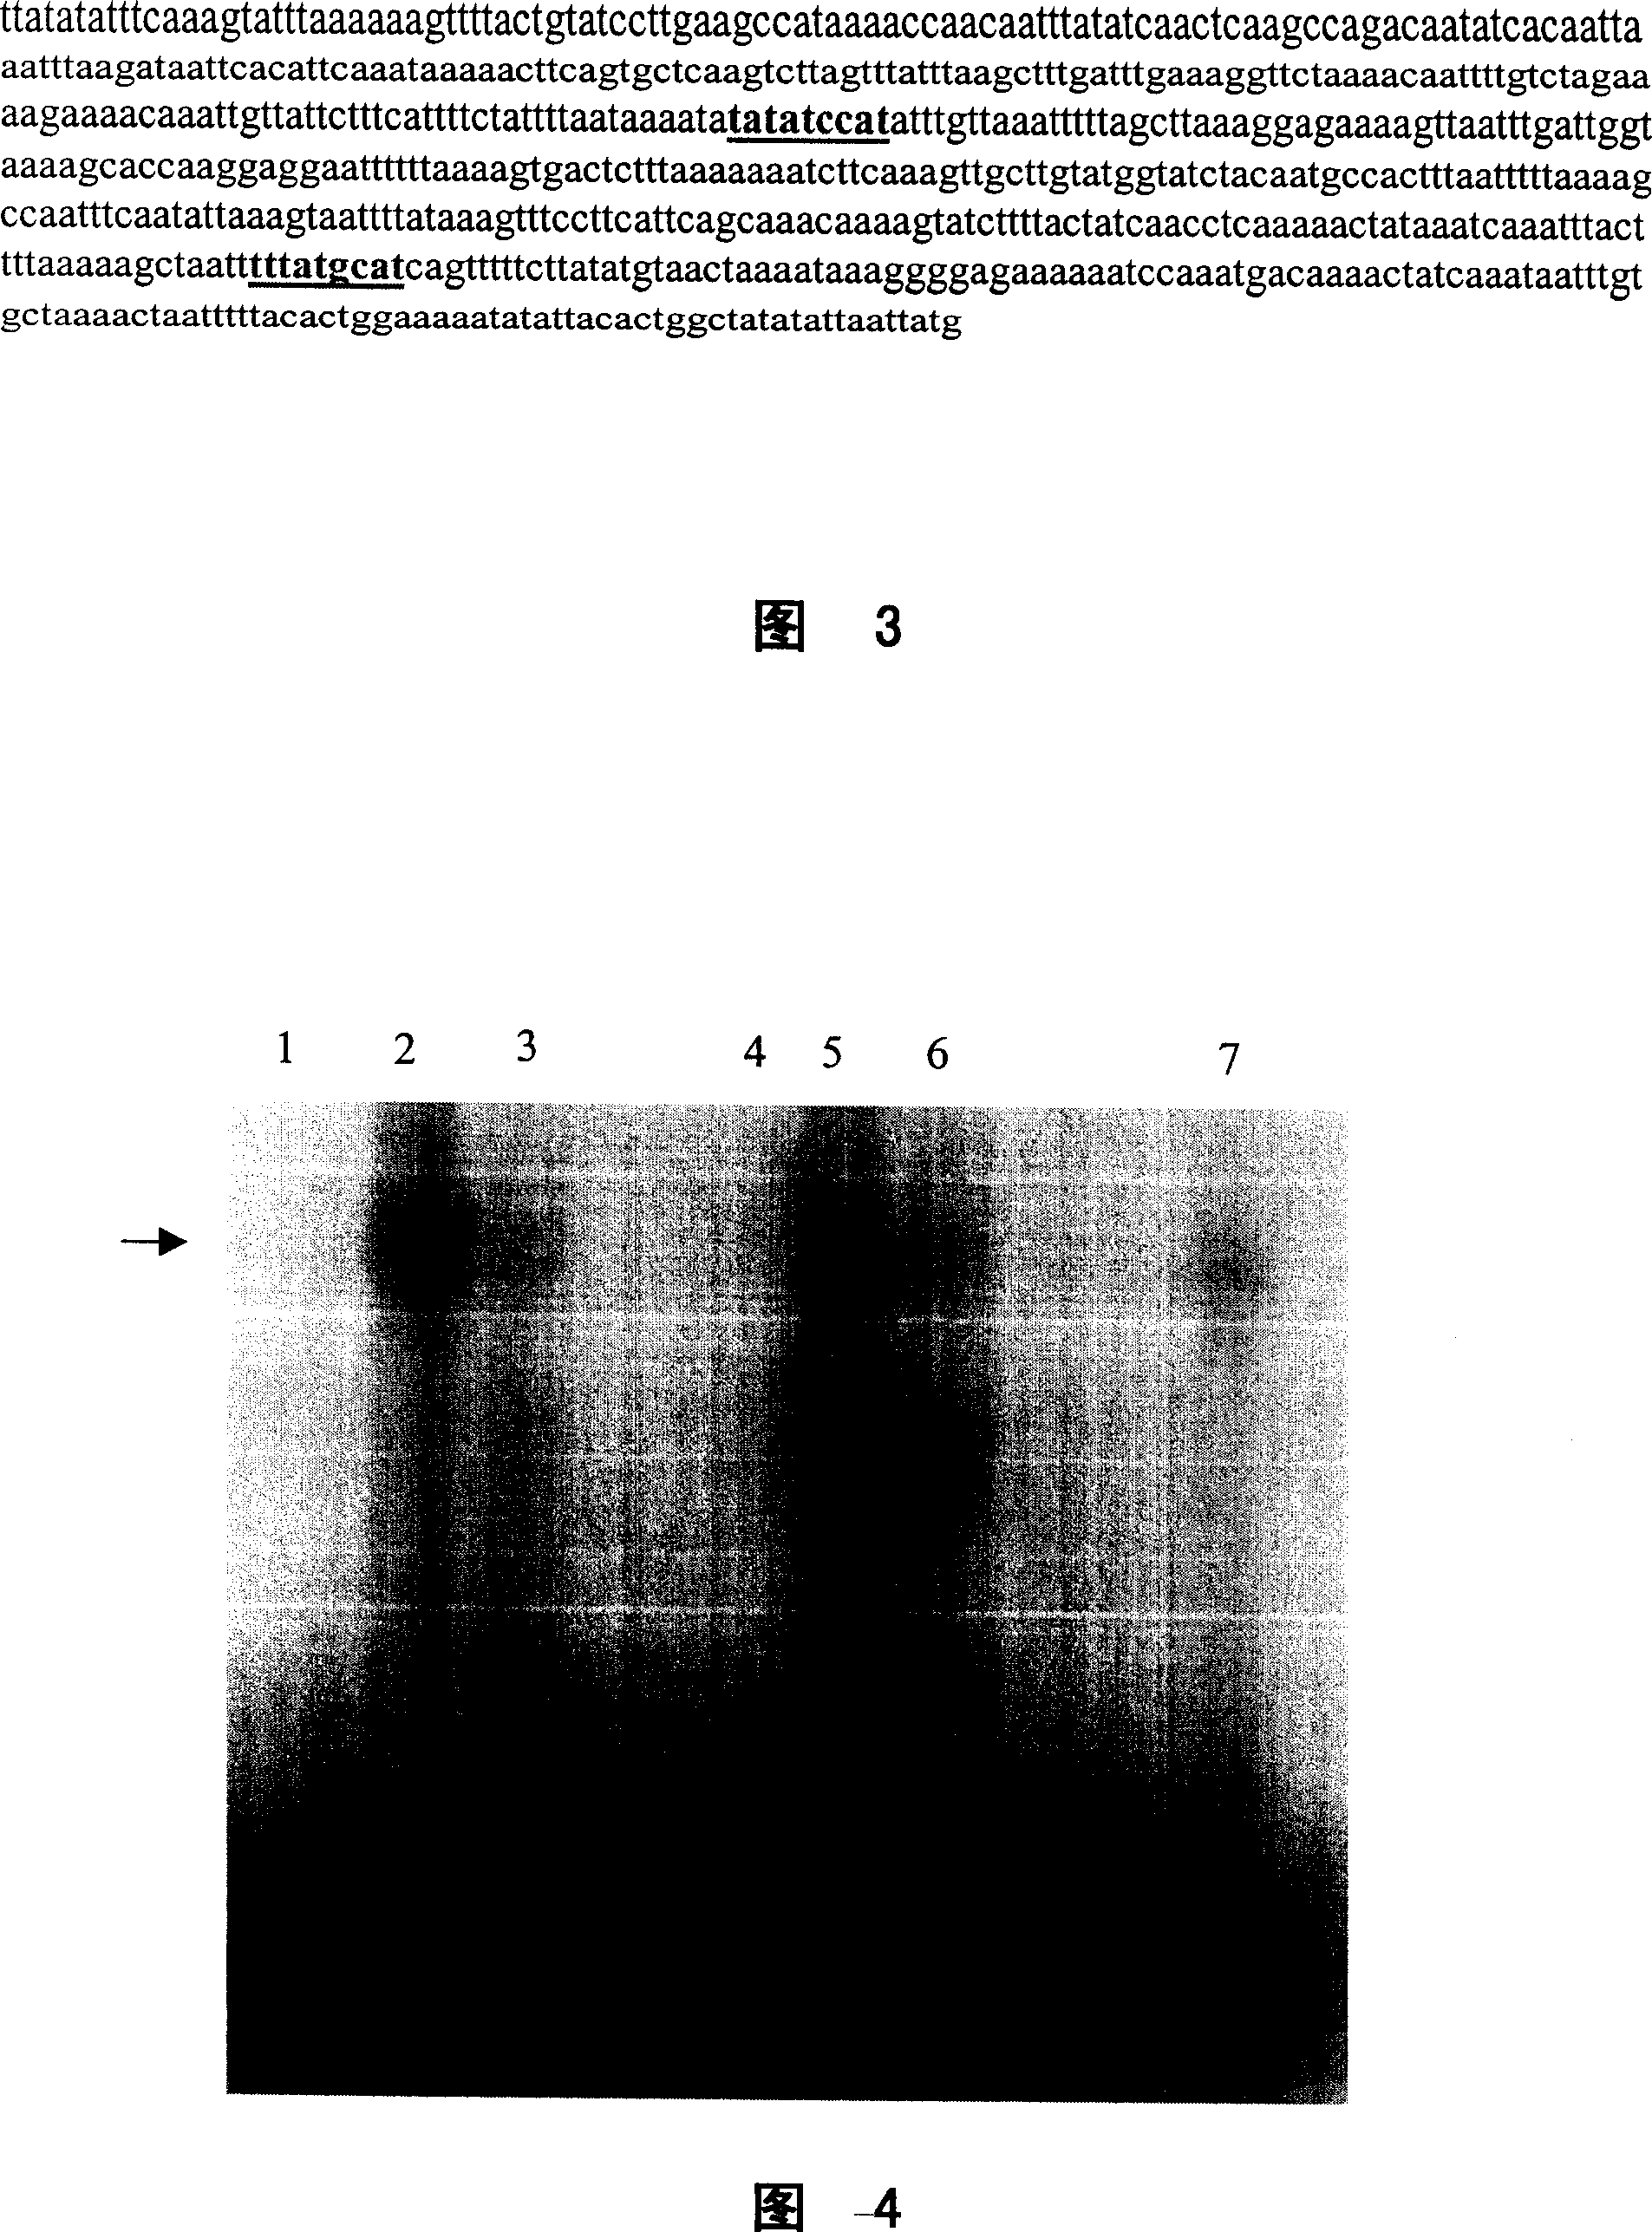 Monoclonal antibody for resisting human osteogenesis induction factor and its preparation method and uses